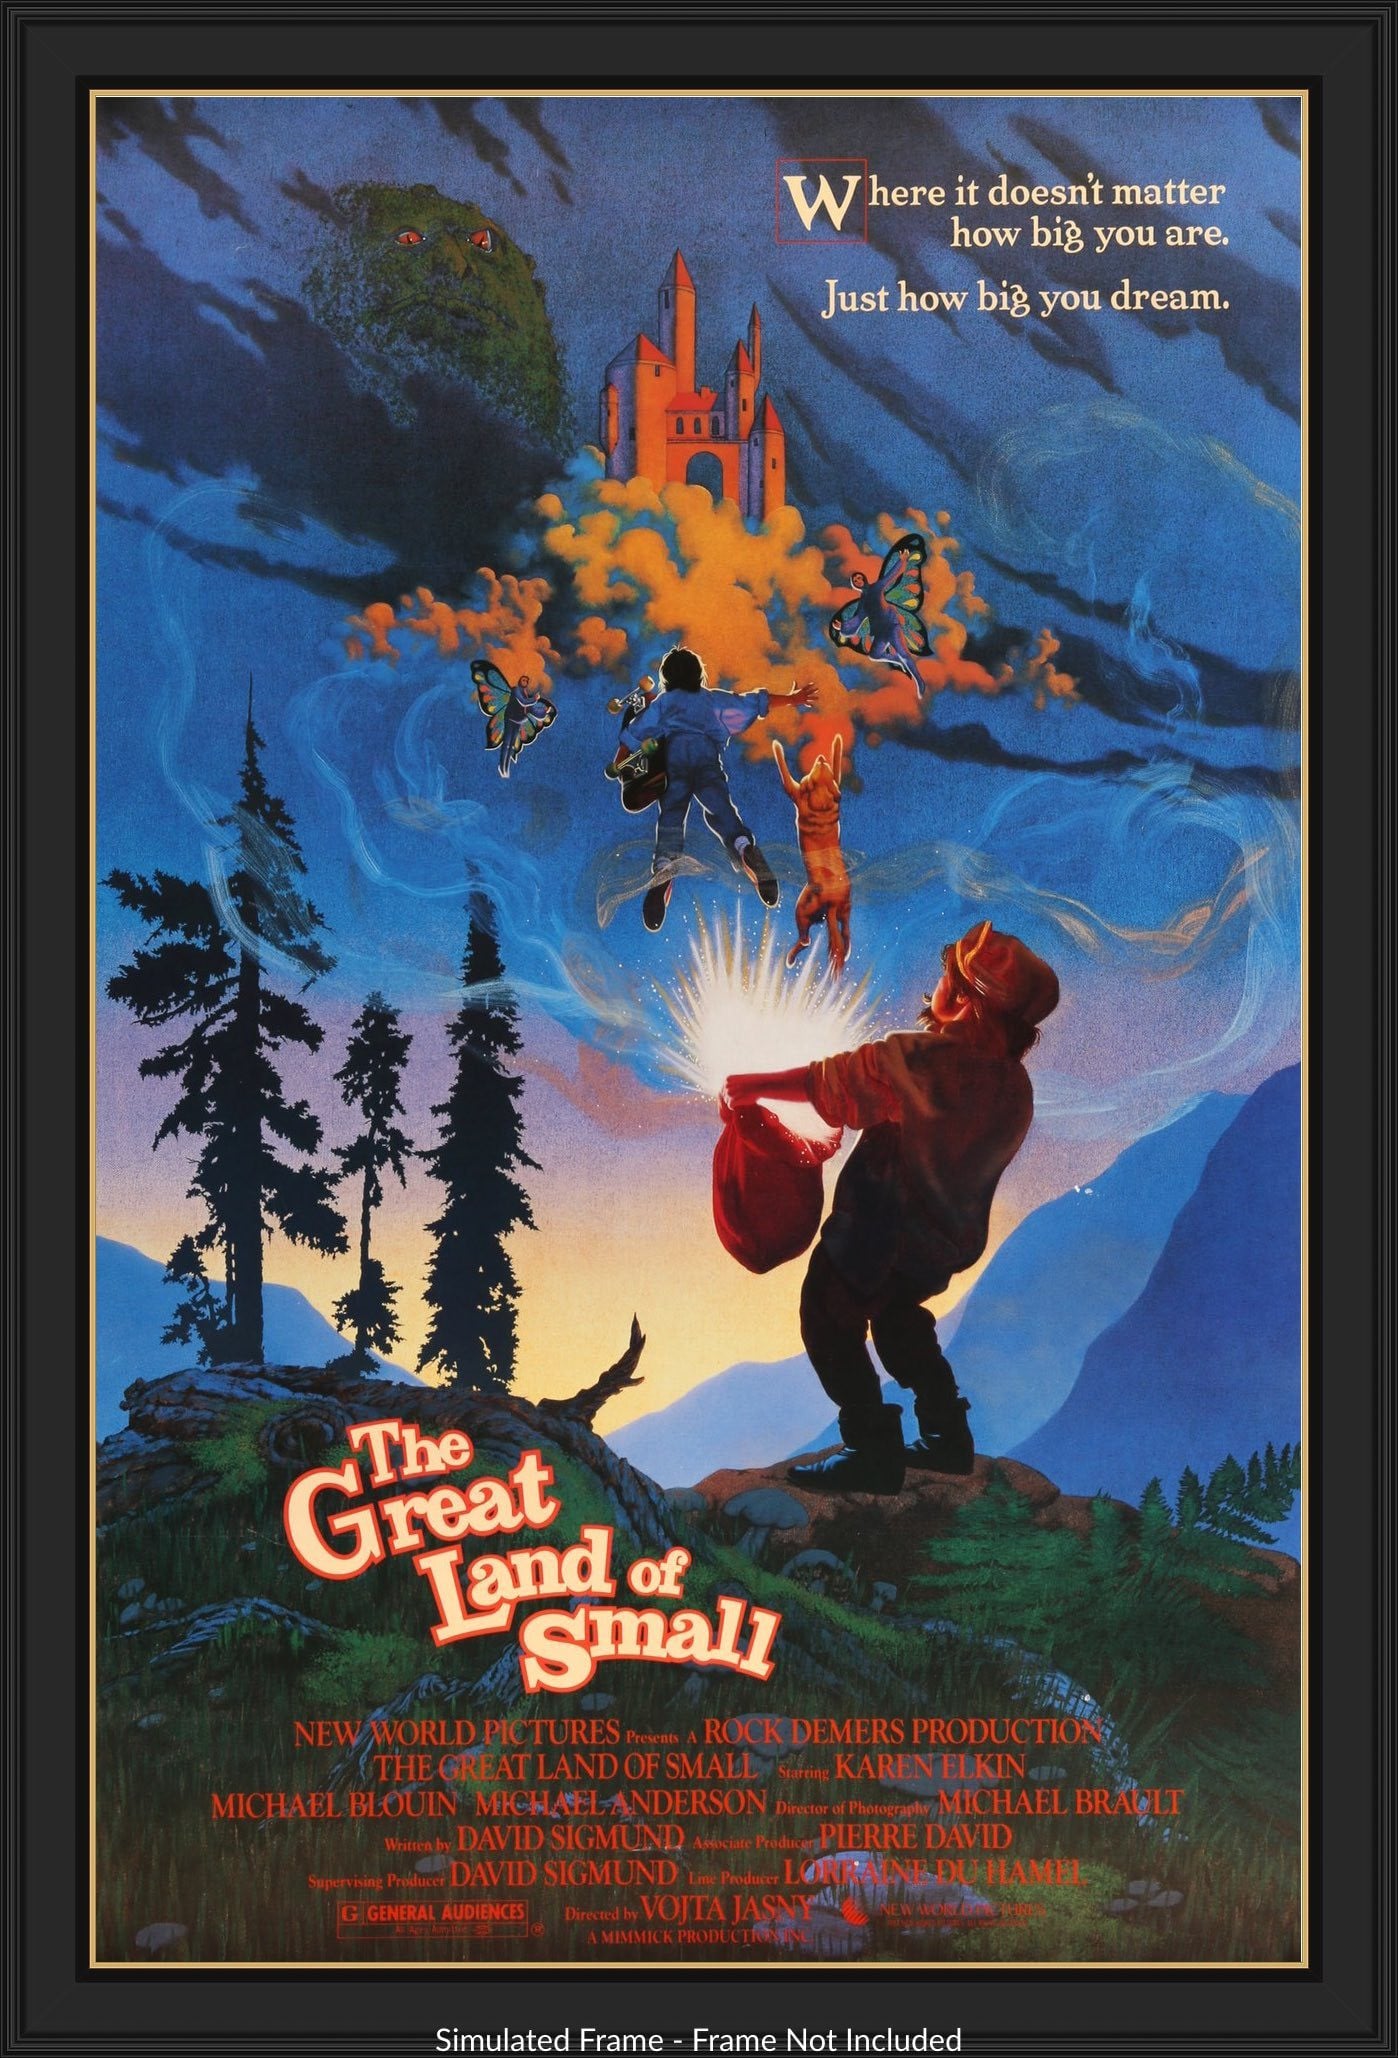 Great Land of Small (1987) original movie poster for sale at Original Film Art